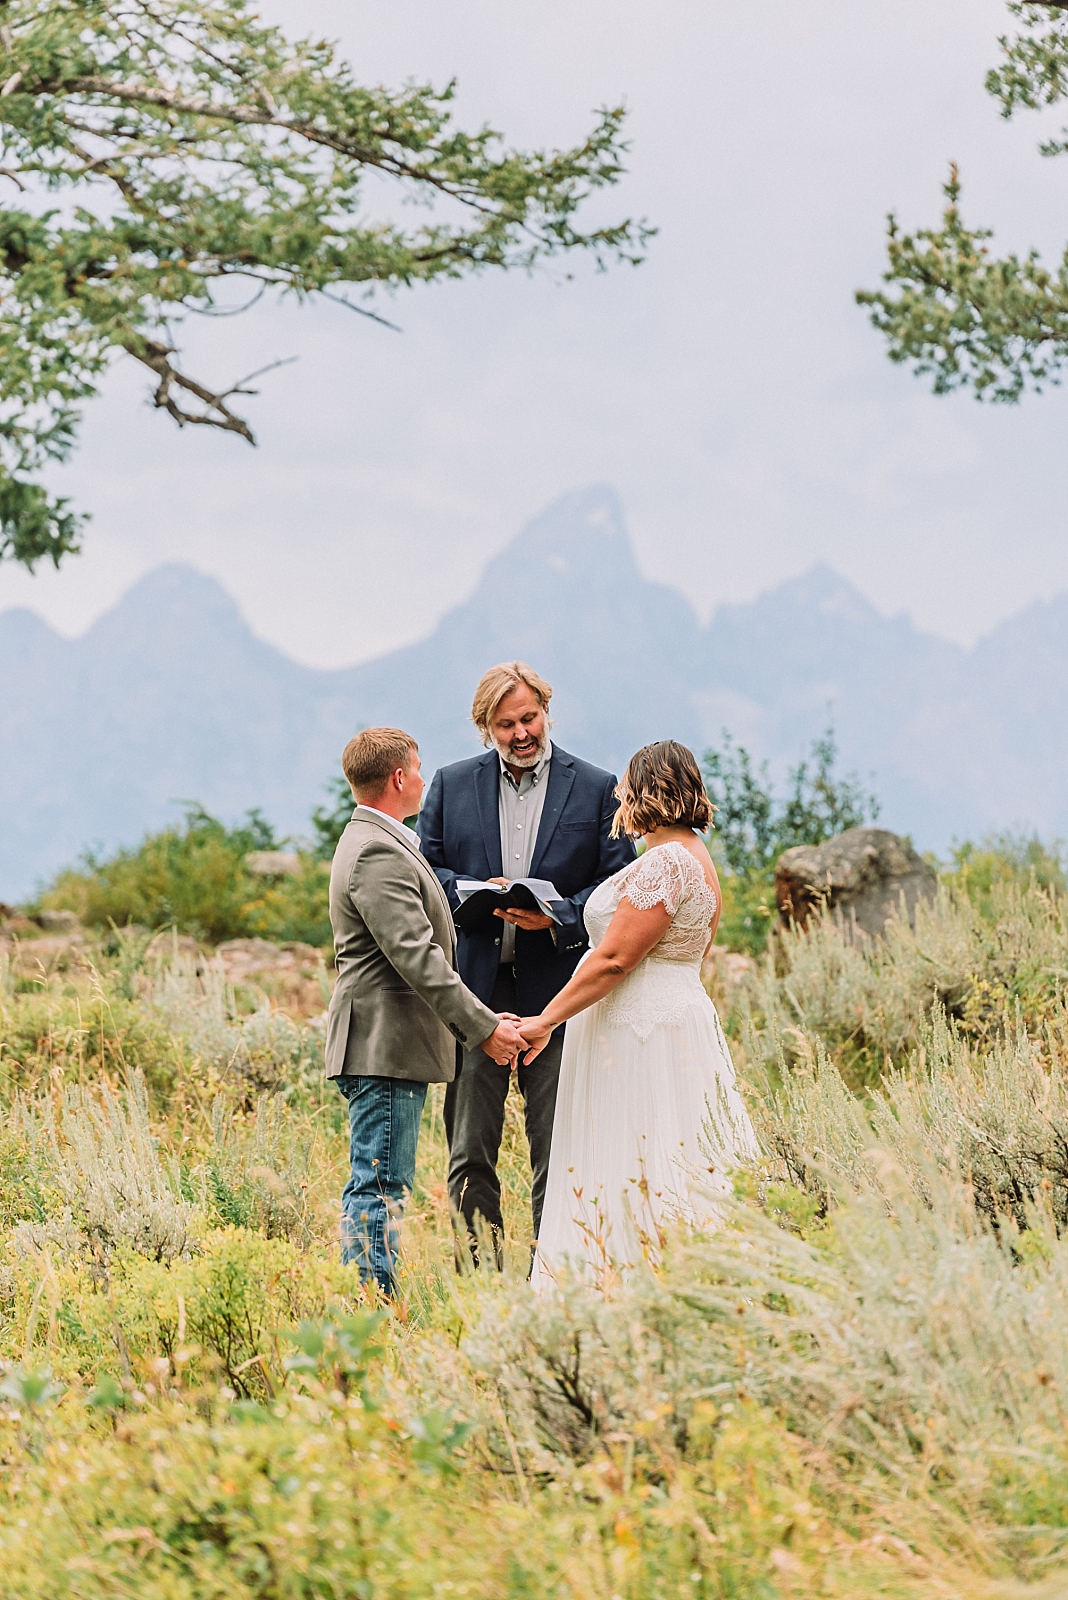 vow renewal, wedding tree in kelly wyoming, where to get married in jackson hole, teton mountain elopement, jackson hole wedding photographer, outdoor wedding, 10 year anniversary vow renewal